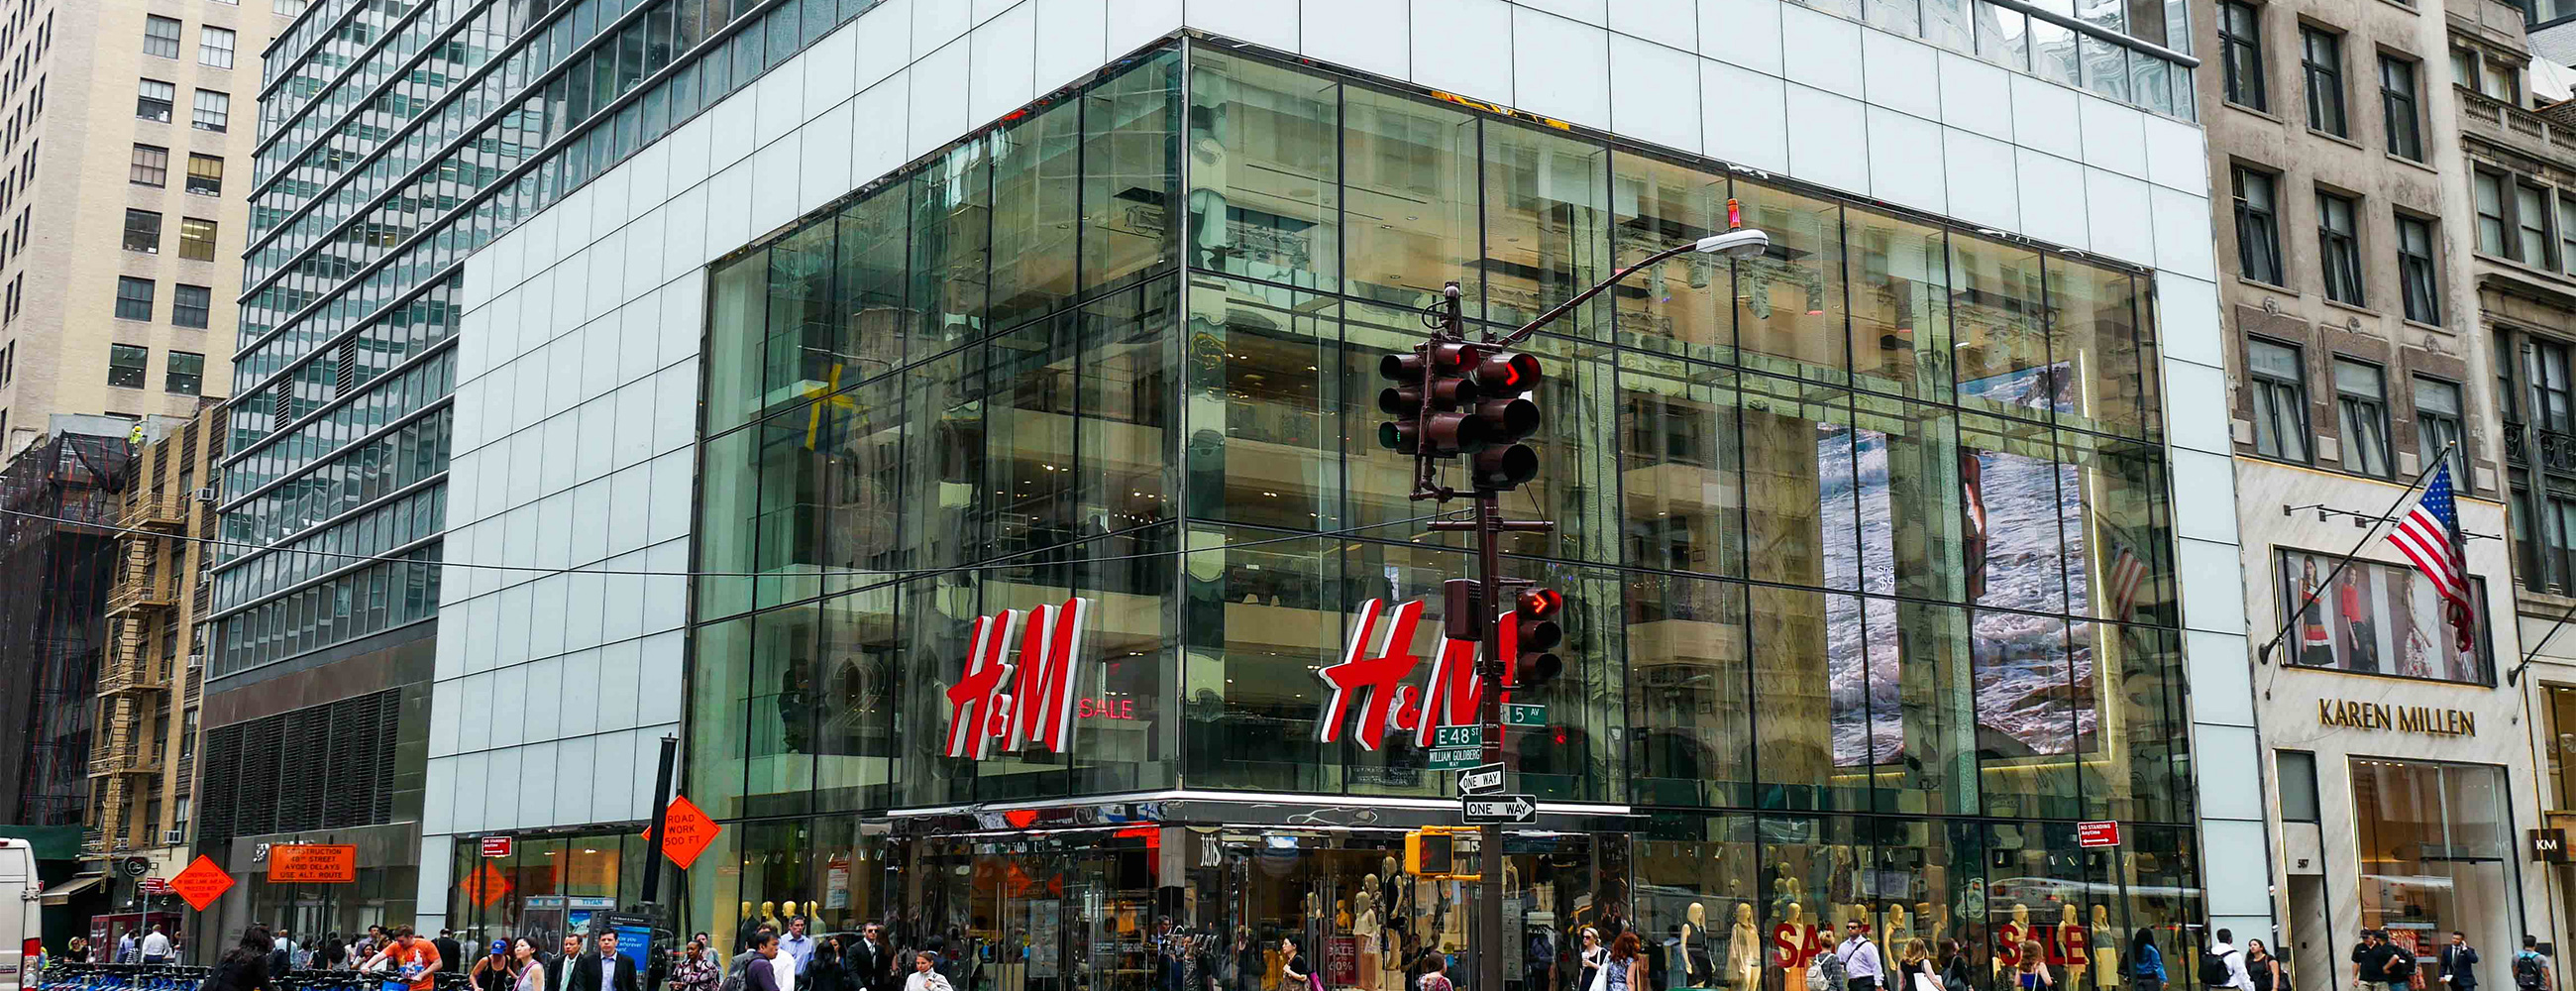 Across the street, corner view of H&M flagship store on 5th ave. Highlights the oversize laminated and insulated glass units.